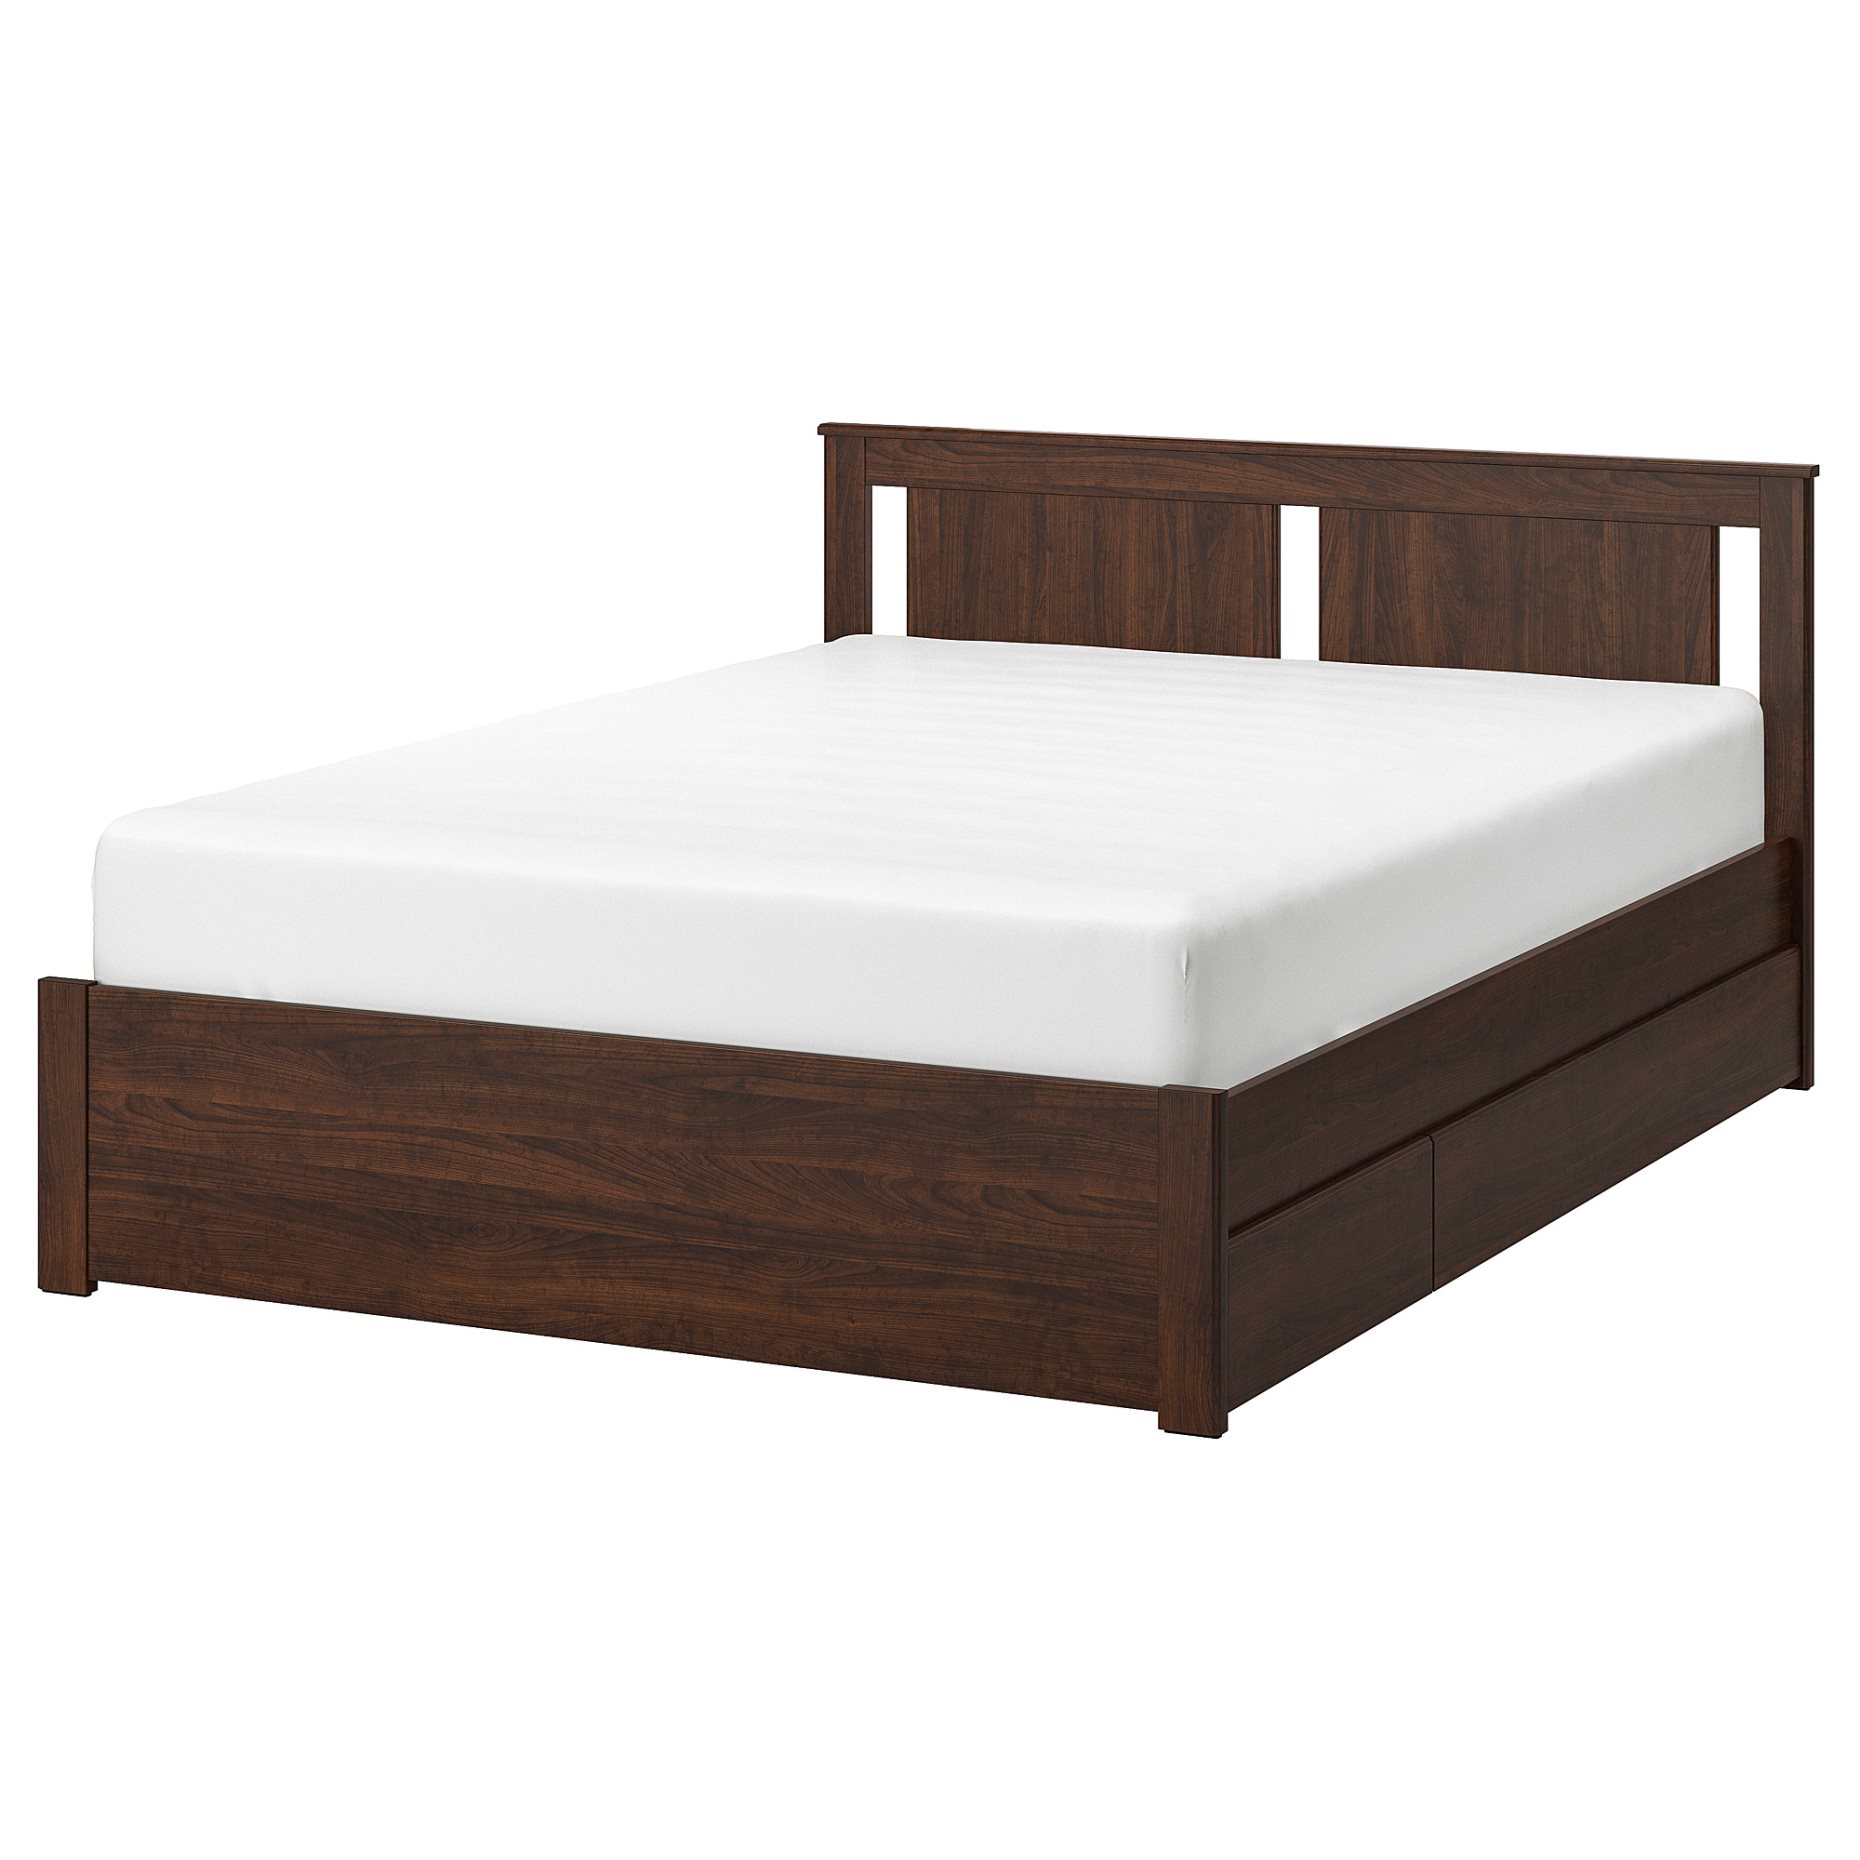 SONGESAND, bed frame with 2 storage boxes, 160X200 cm, 692.411.15